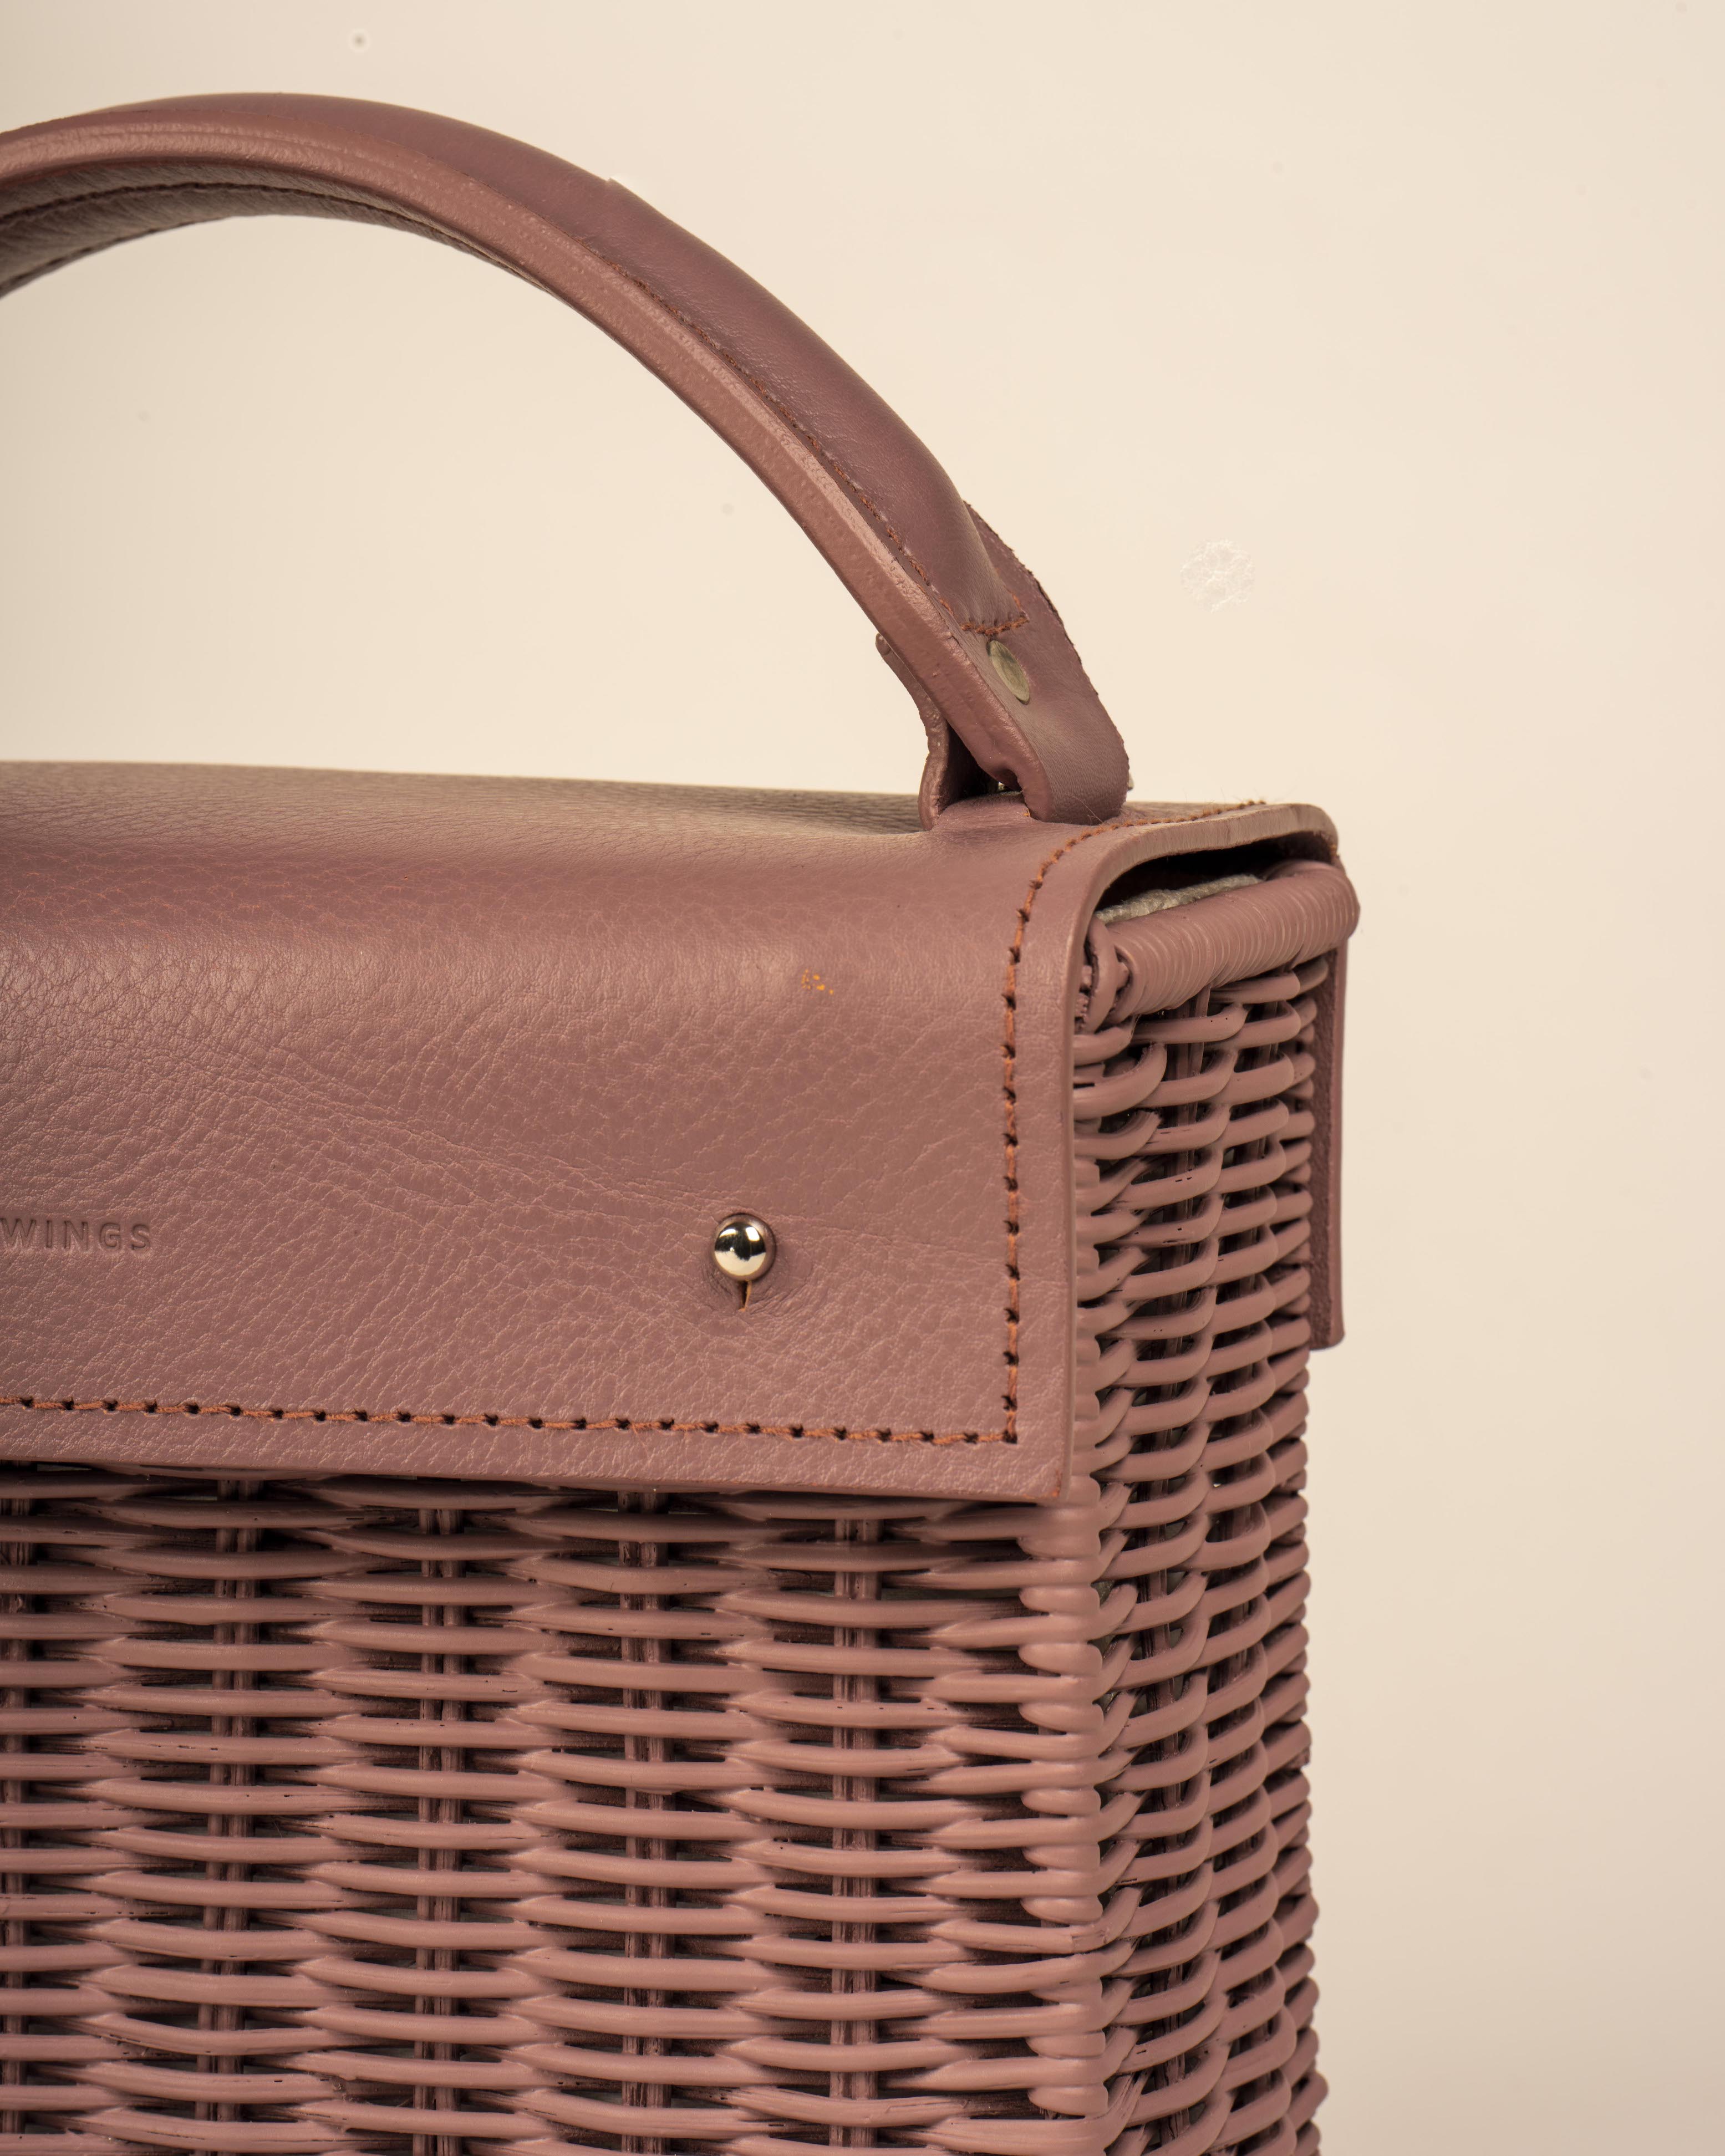 Wicker Wings handwoven Kuai dusk bag, close up of the front flap. 